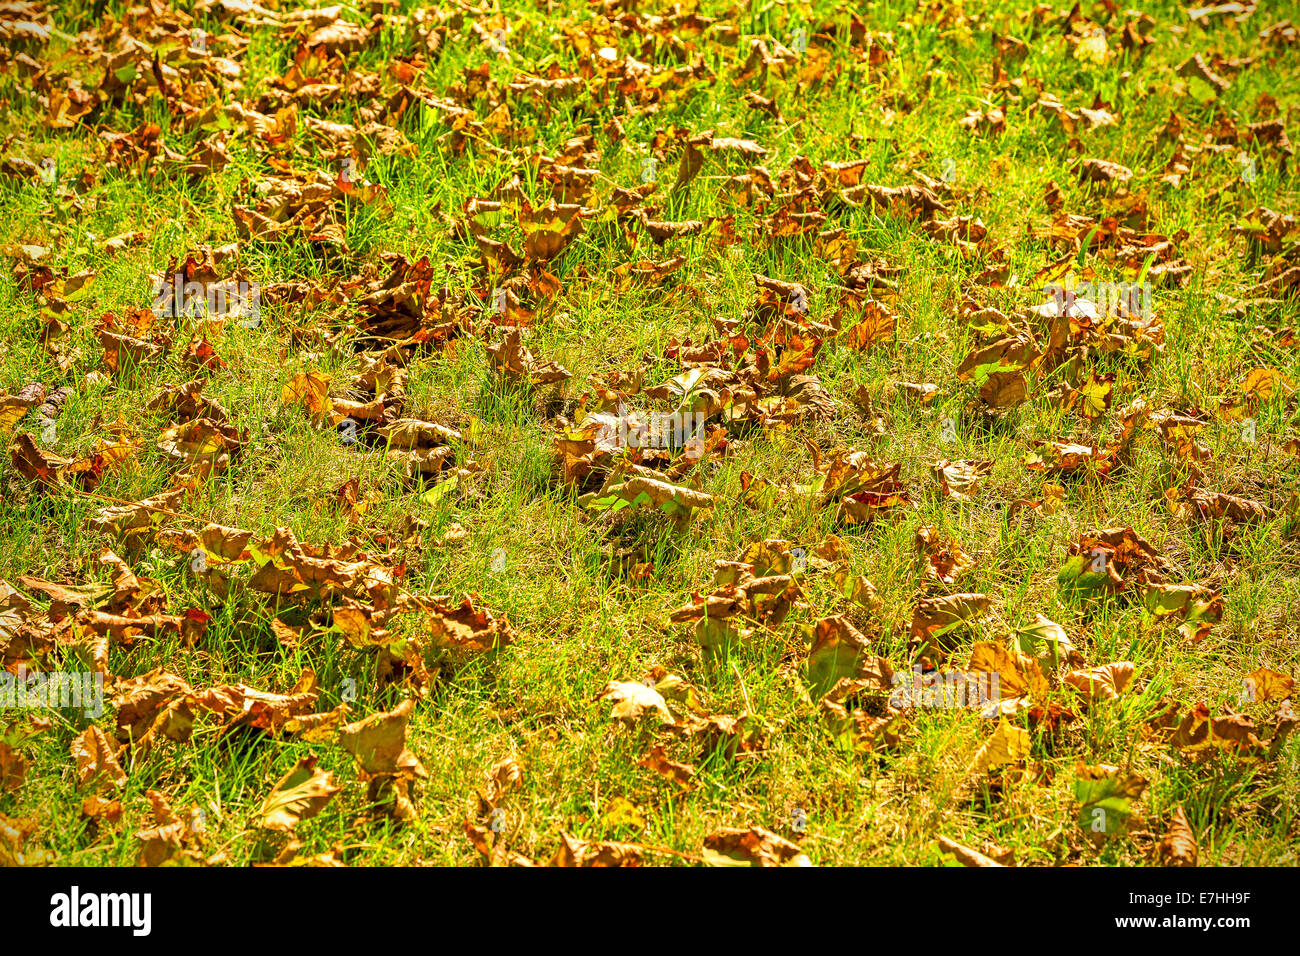 Dry autumn leafs on green grass background, shallow depth of field. Stock Photo